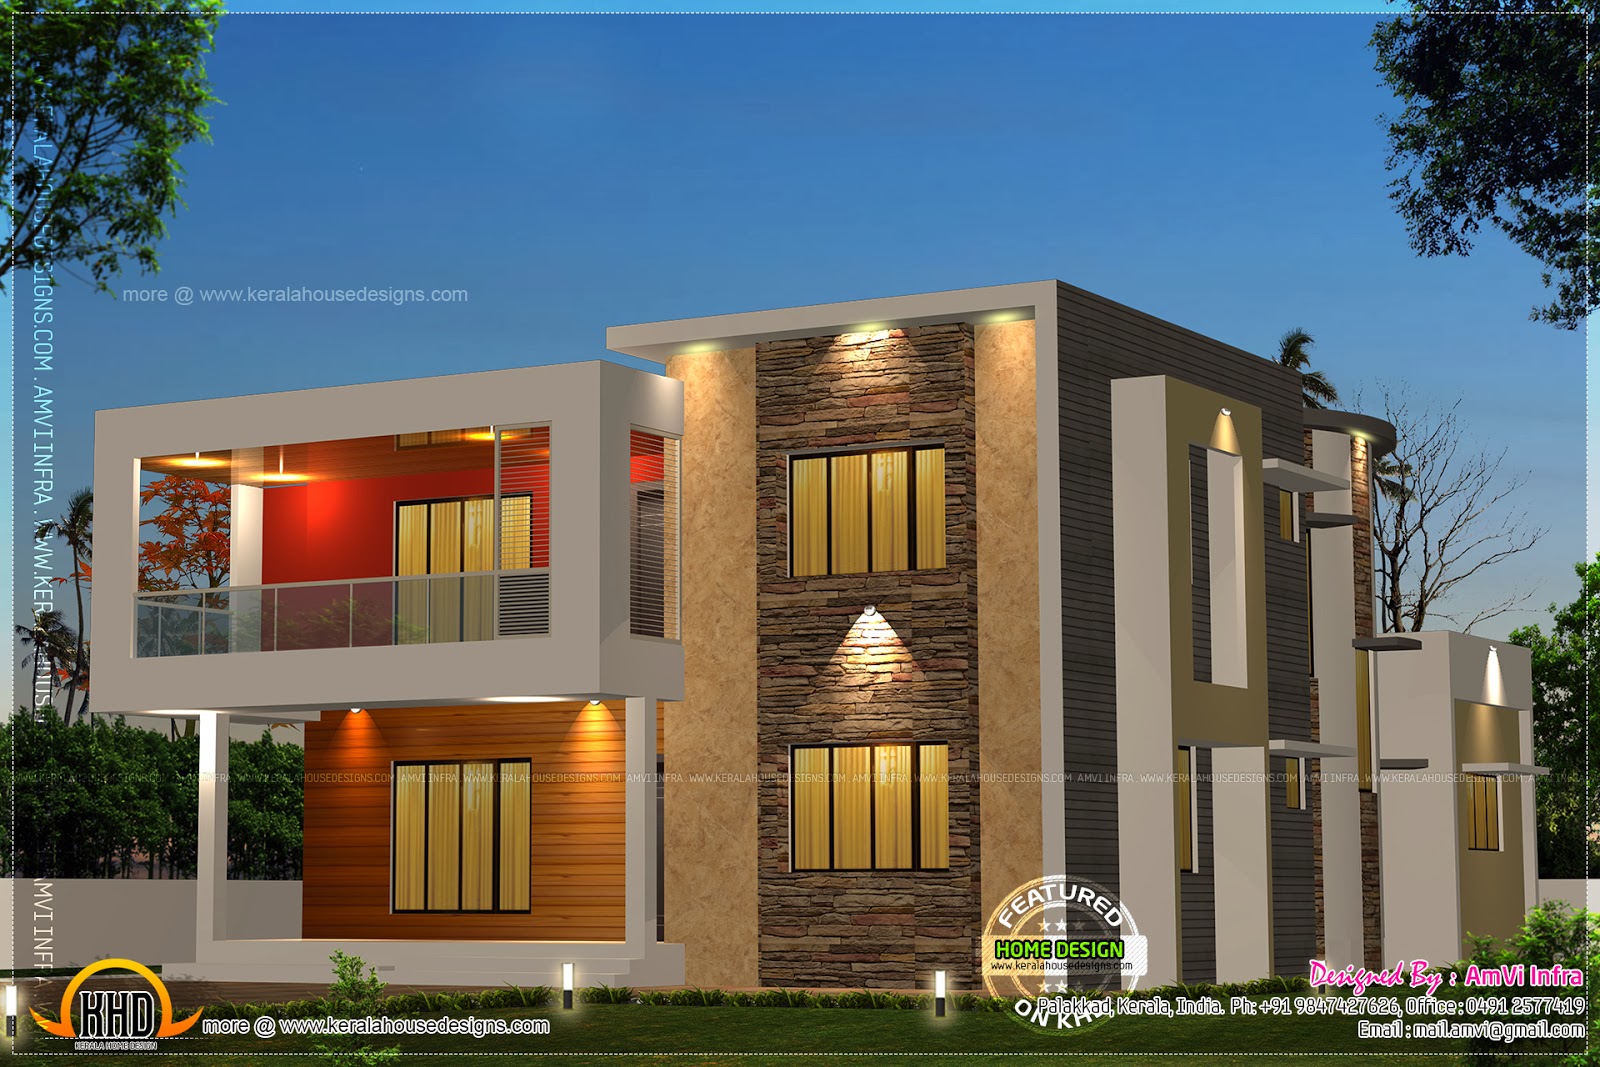  5  bedroom  contemporary  house  with plan  Indian House  Plans 